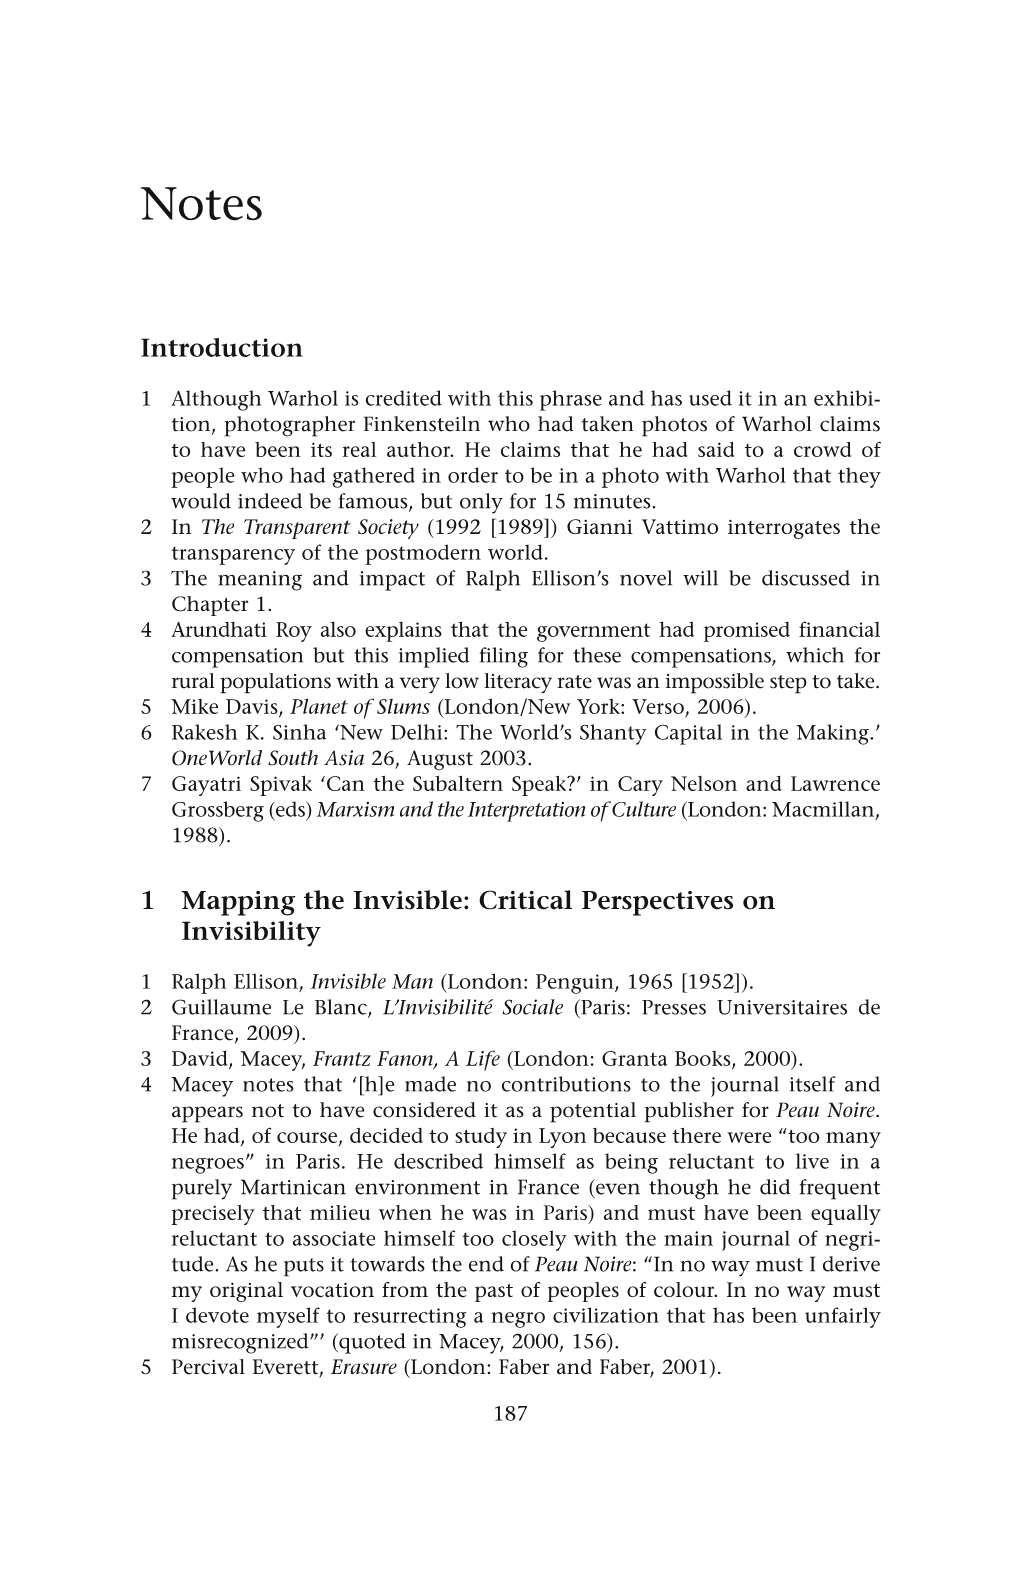 Introduction 1 Mapping the Invisible: Critical Perspectives on Invisibility